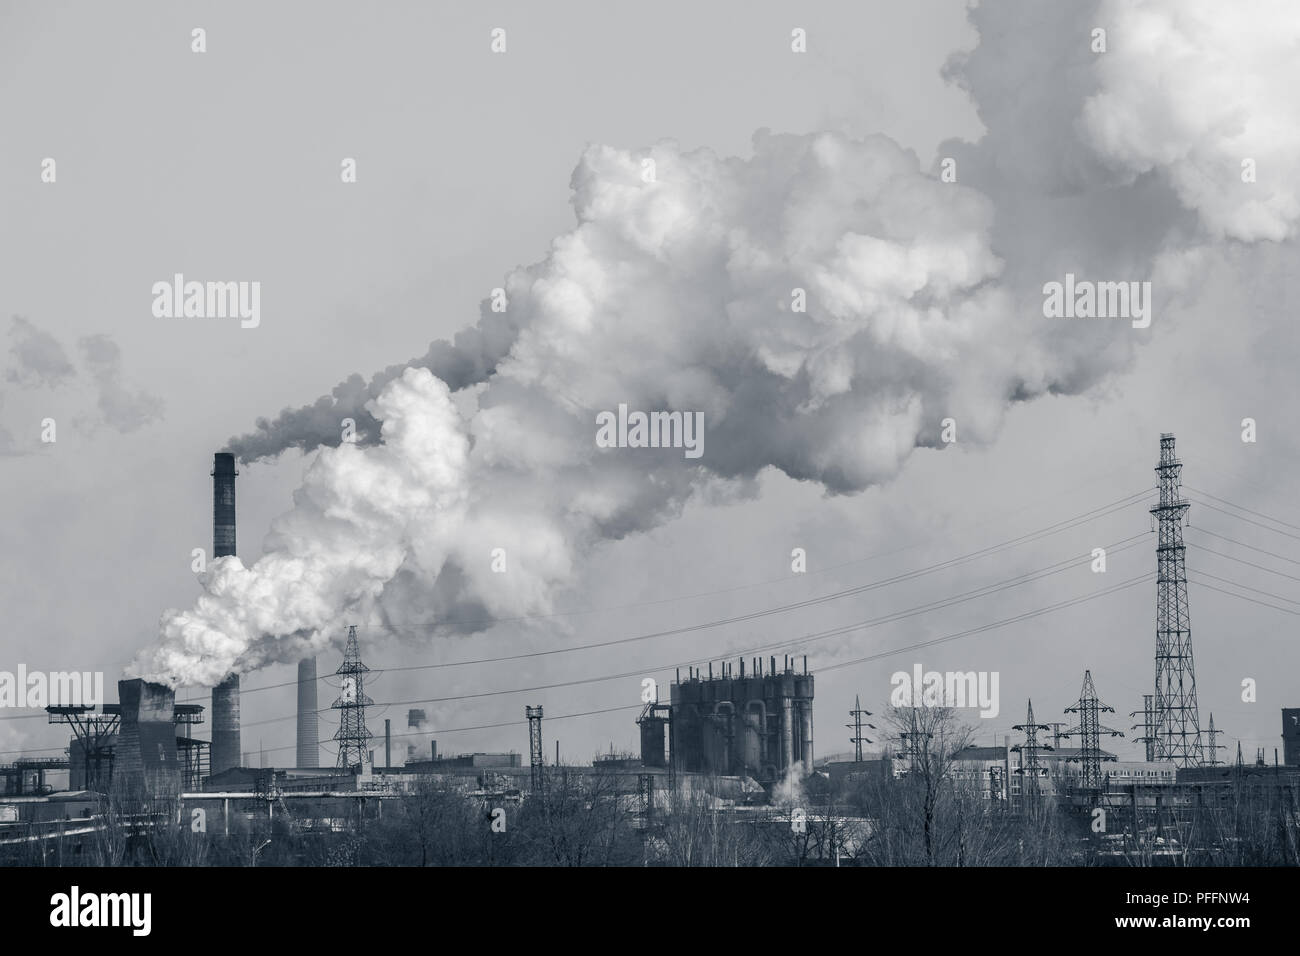 smoke stacks in a working factory emitting steam, smog and air pollution. Stock Photo